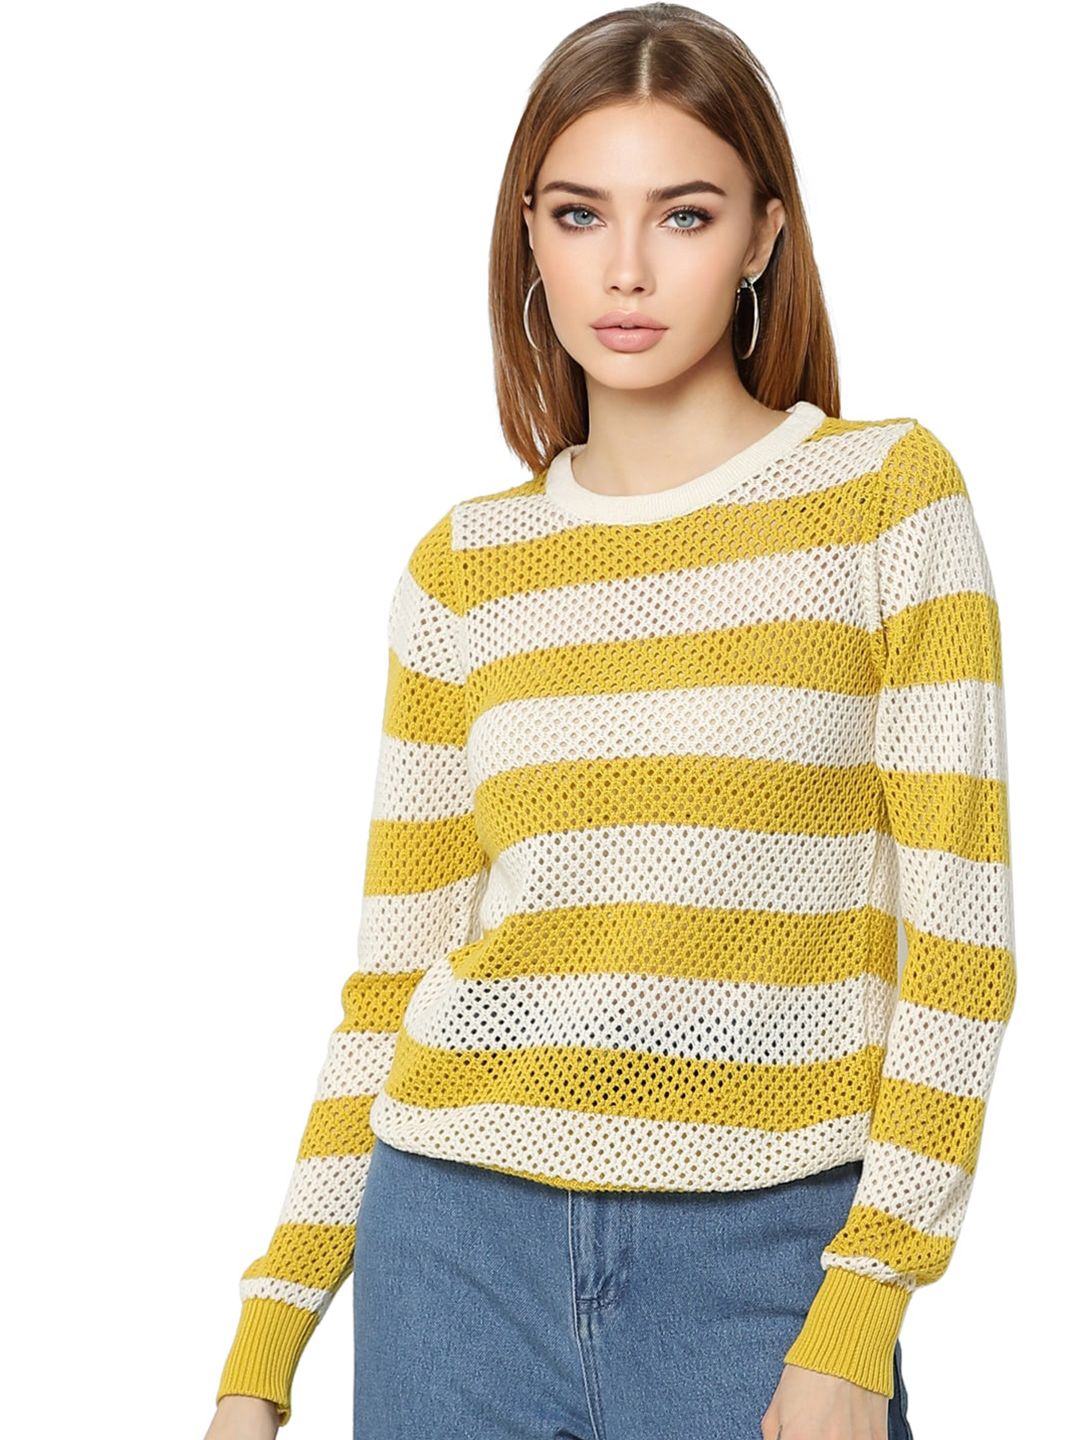 ONLY Women Beige & Yellow Striped Cotton Pullover Price in India